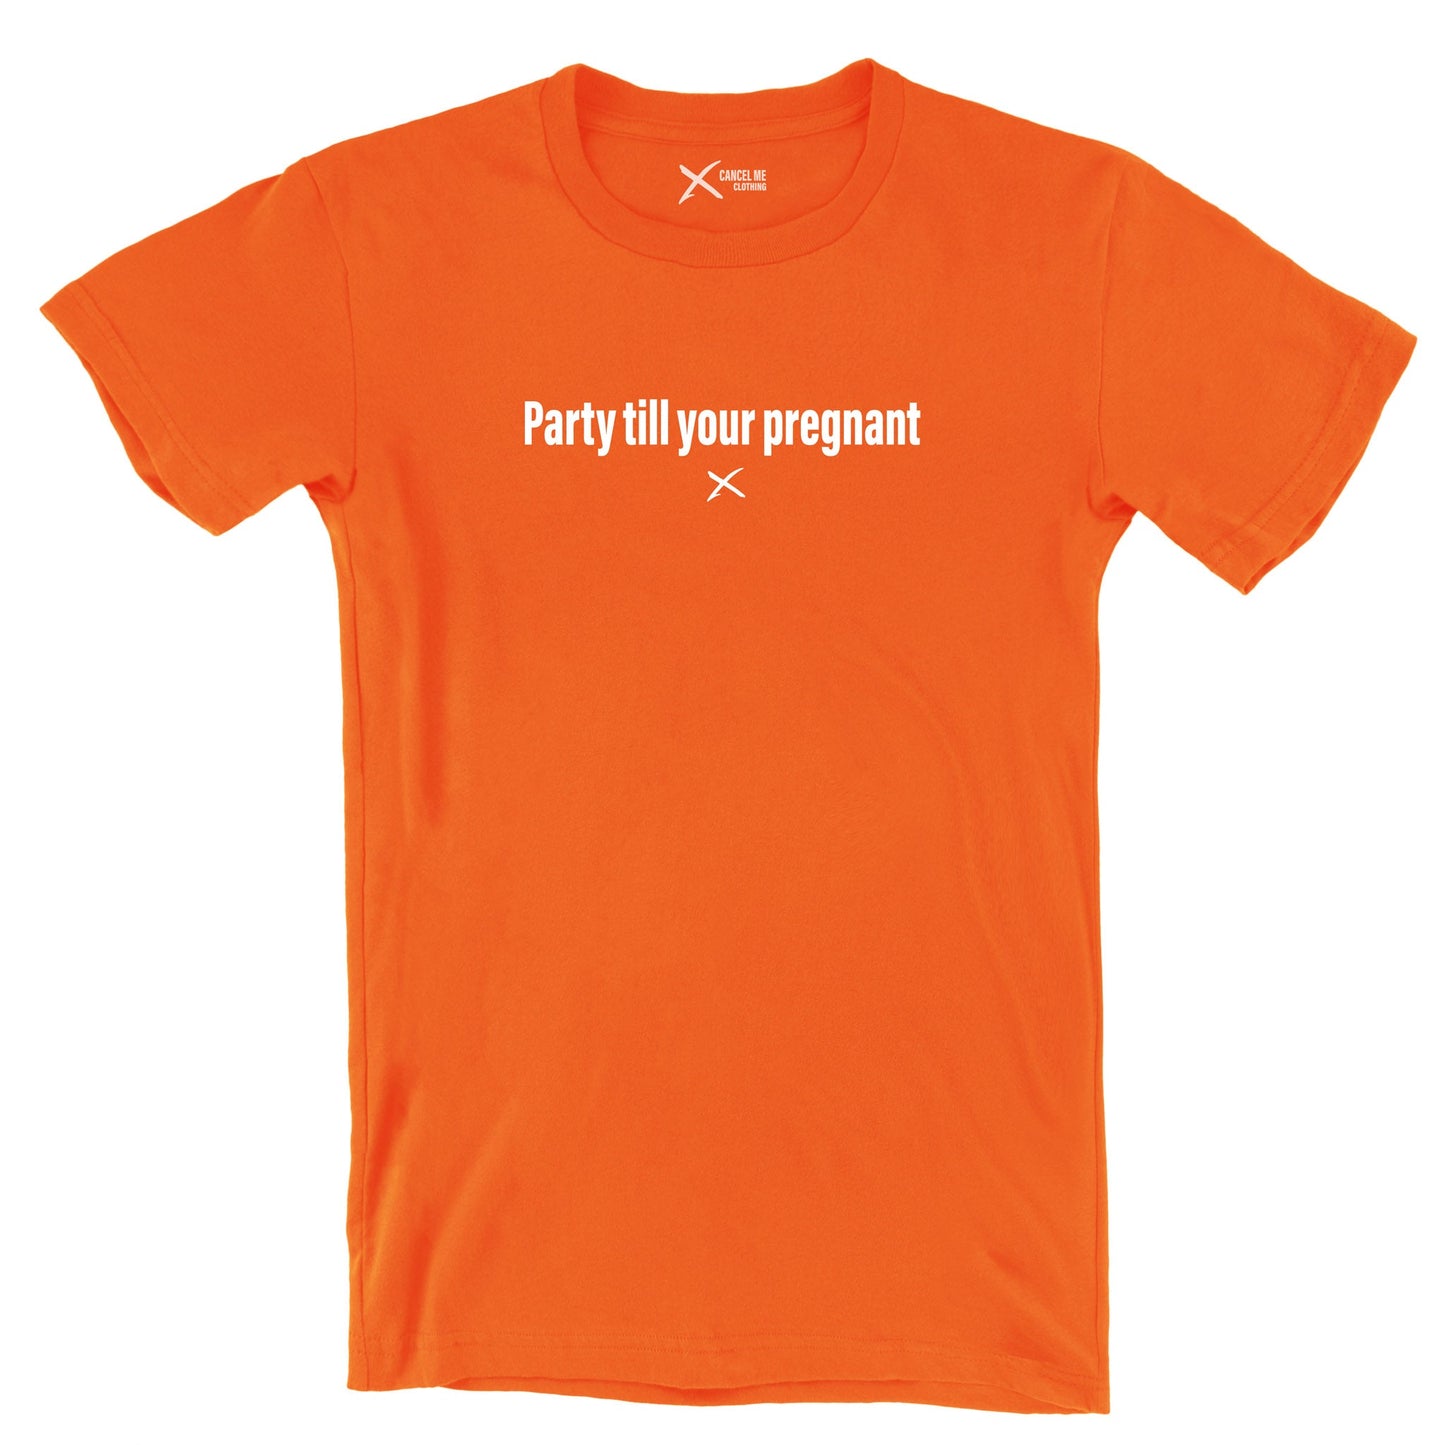 Party till your pregnant - Shirt